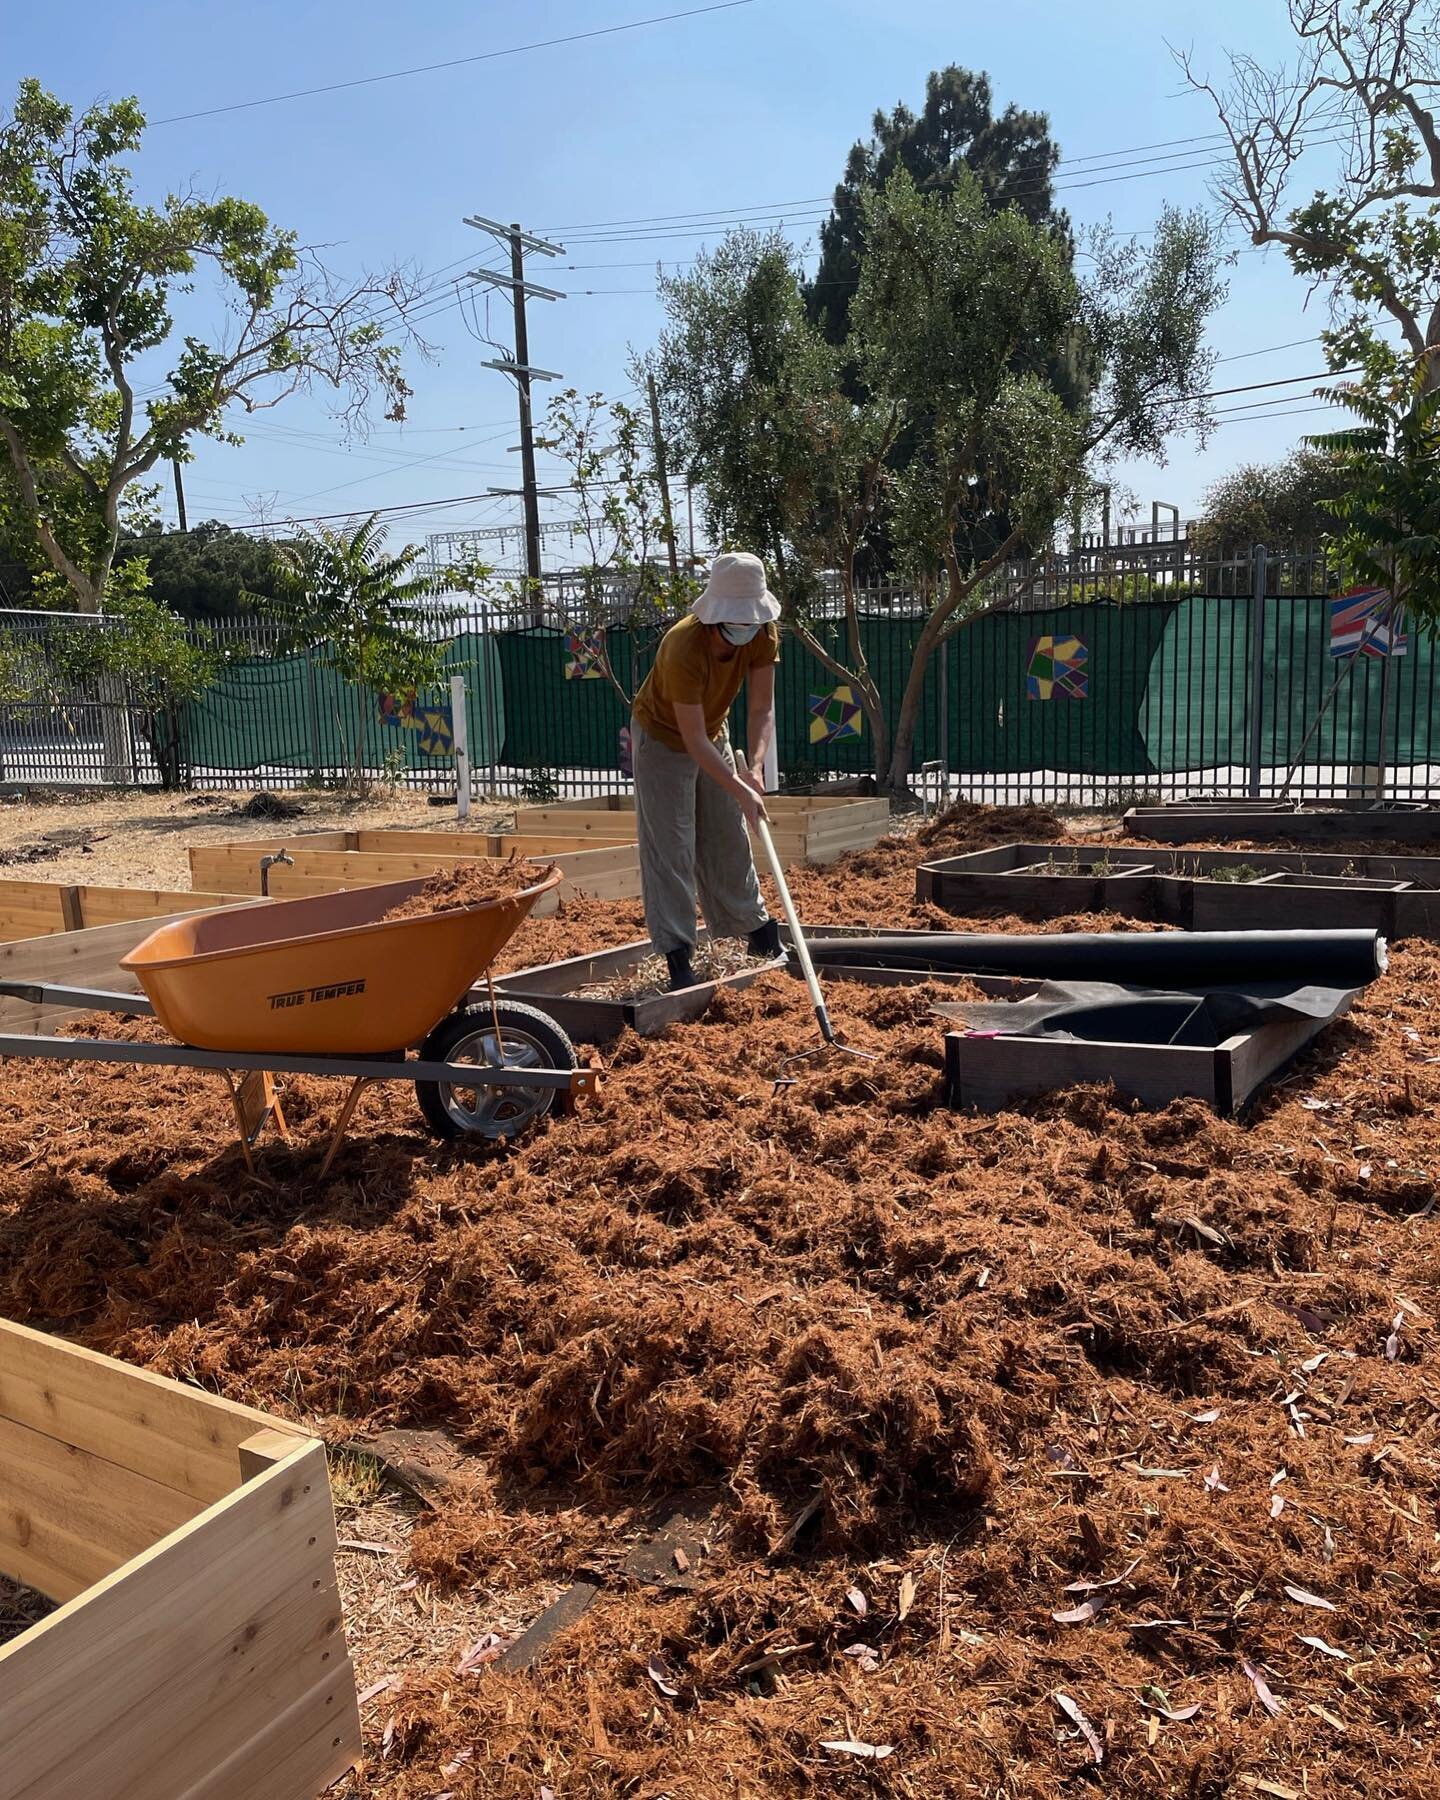 Last summer GSF teamed up with 99th St. Elementary to refurbish their on-campus garden. Today the garden has 13 raised beds, a shaded classroom area, and native sages. &ldquo;The space had a true transformation this year thanks to all the students, p